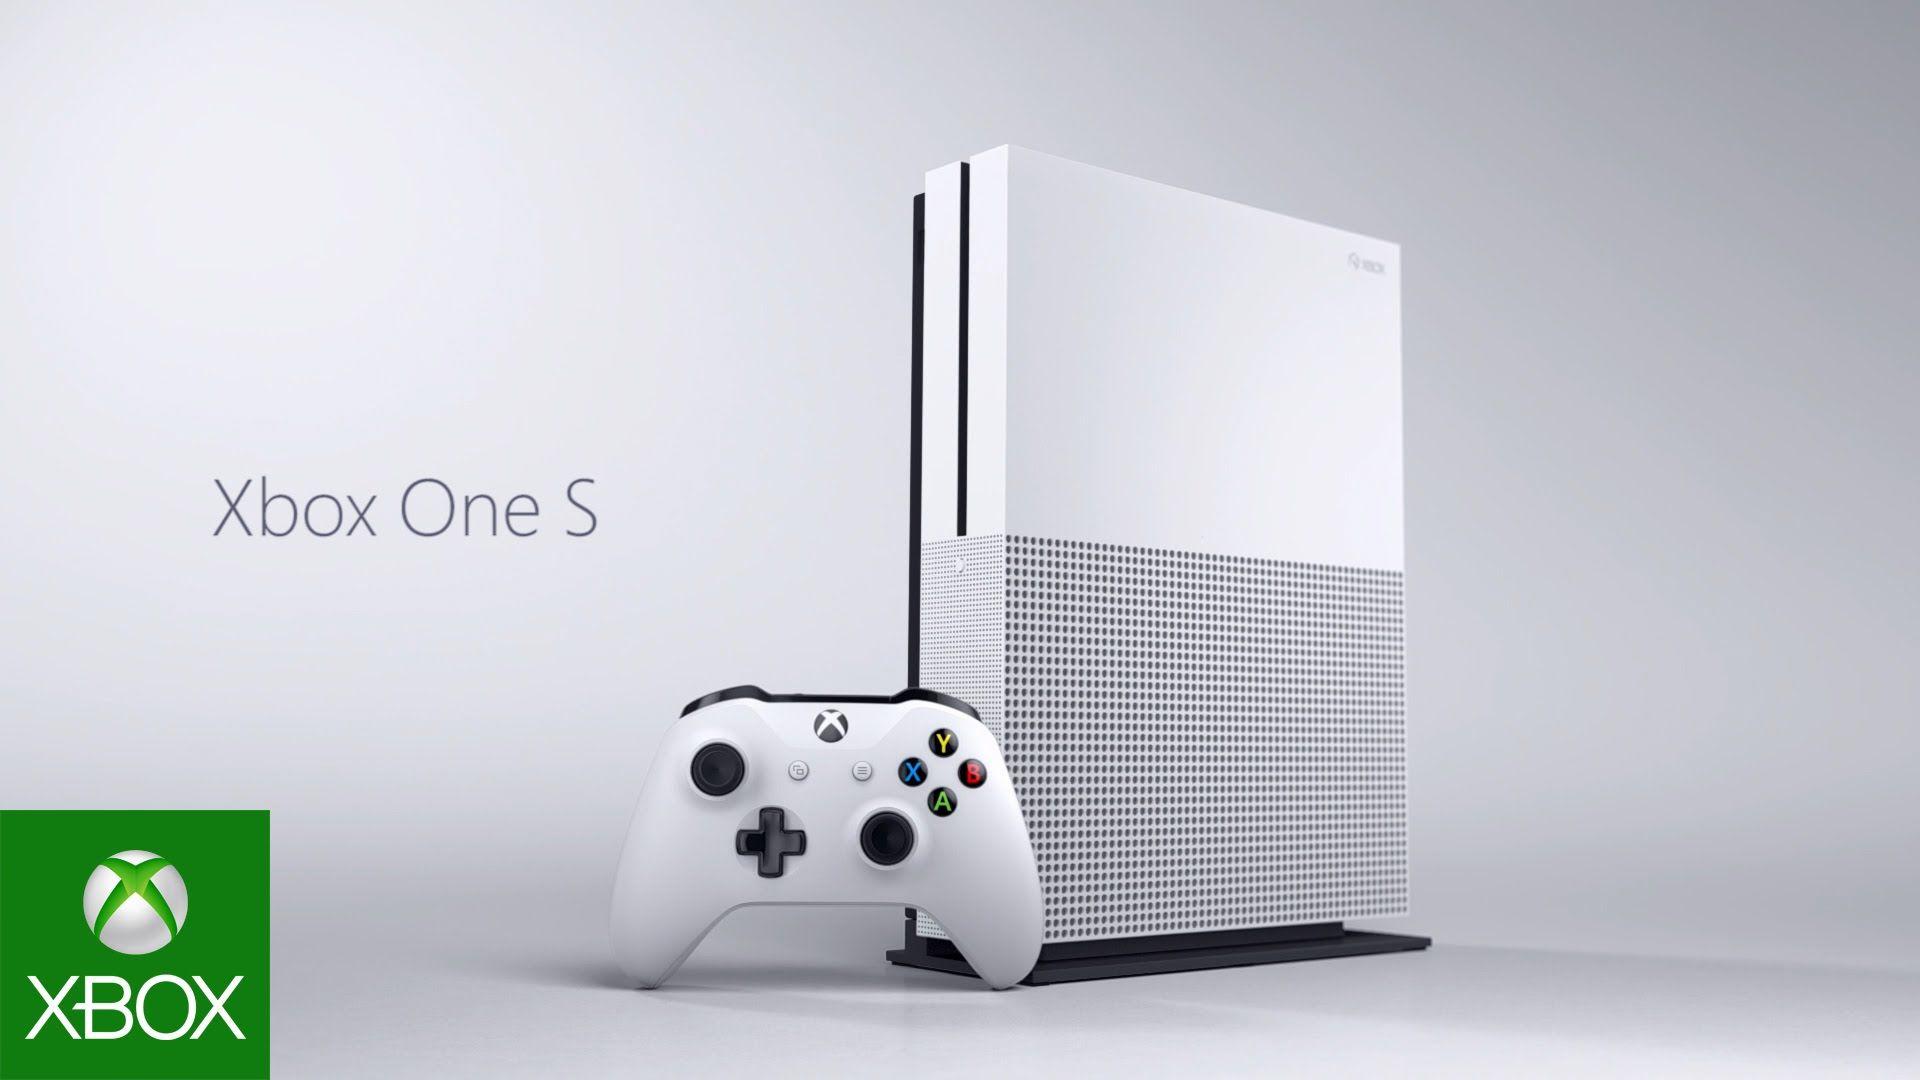 The 2TB Xbox One S is almost sold out for good